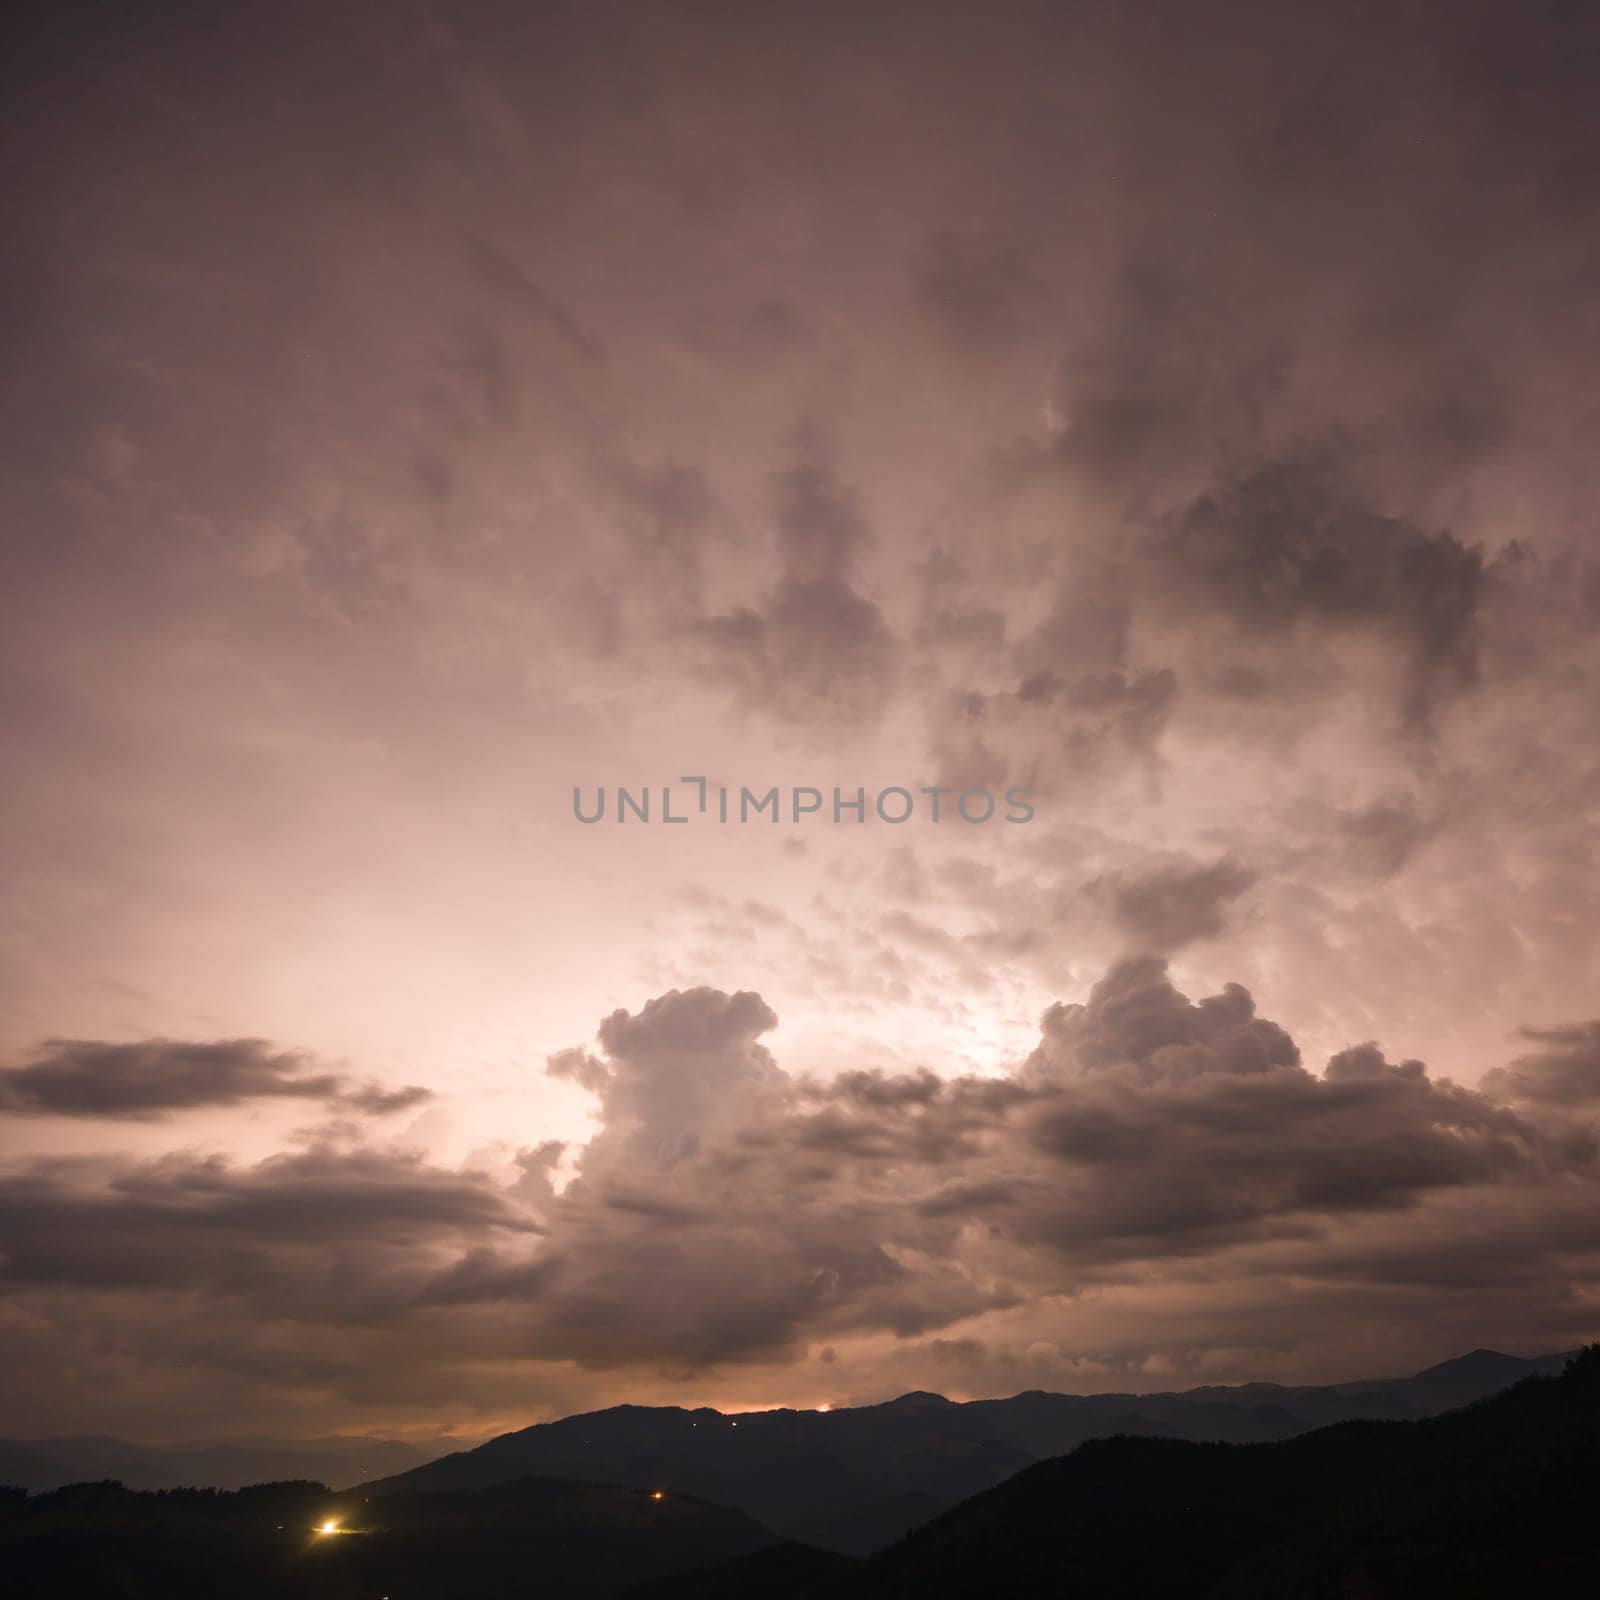 Evening thunderstorm with lightning in the mountains. Dramatic clouds during a thunderstorm pierce the light of lightning in a mountainous area. by Niko_Cingaryuk